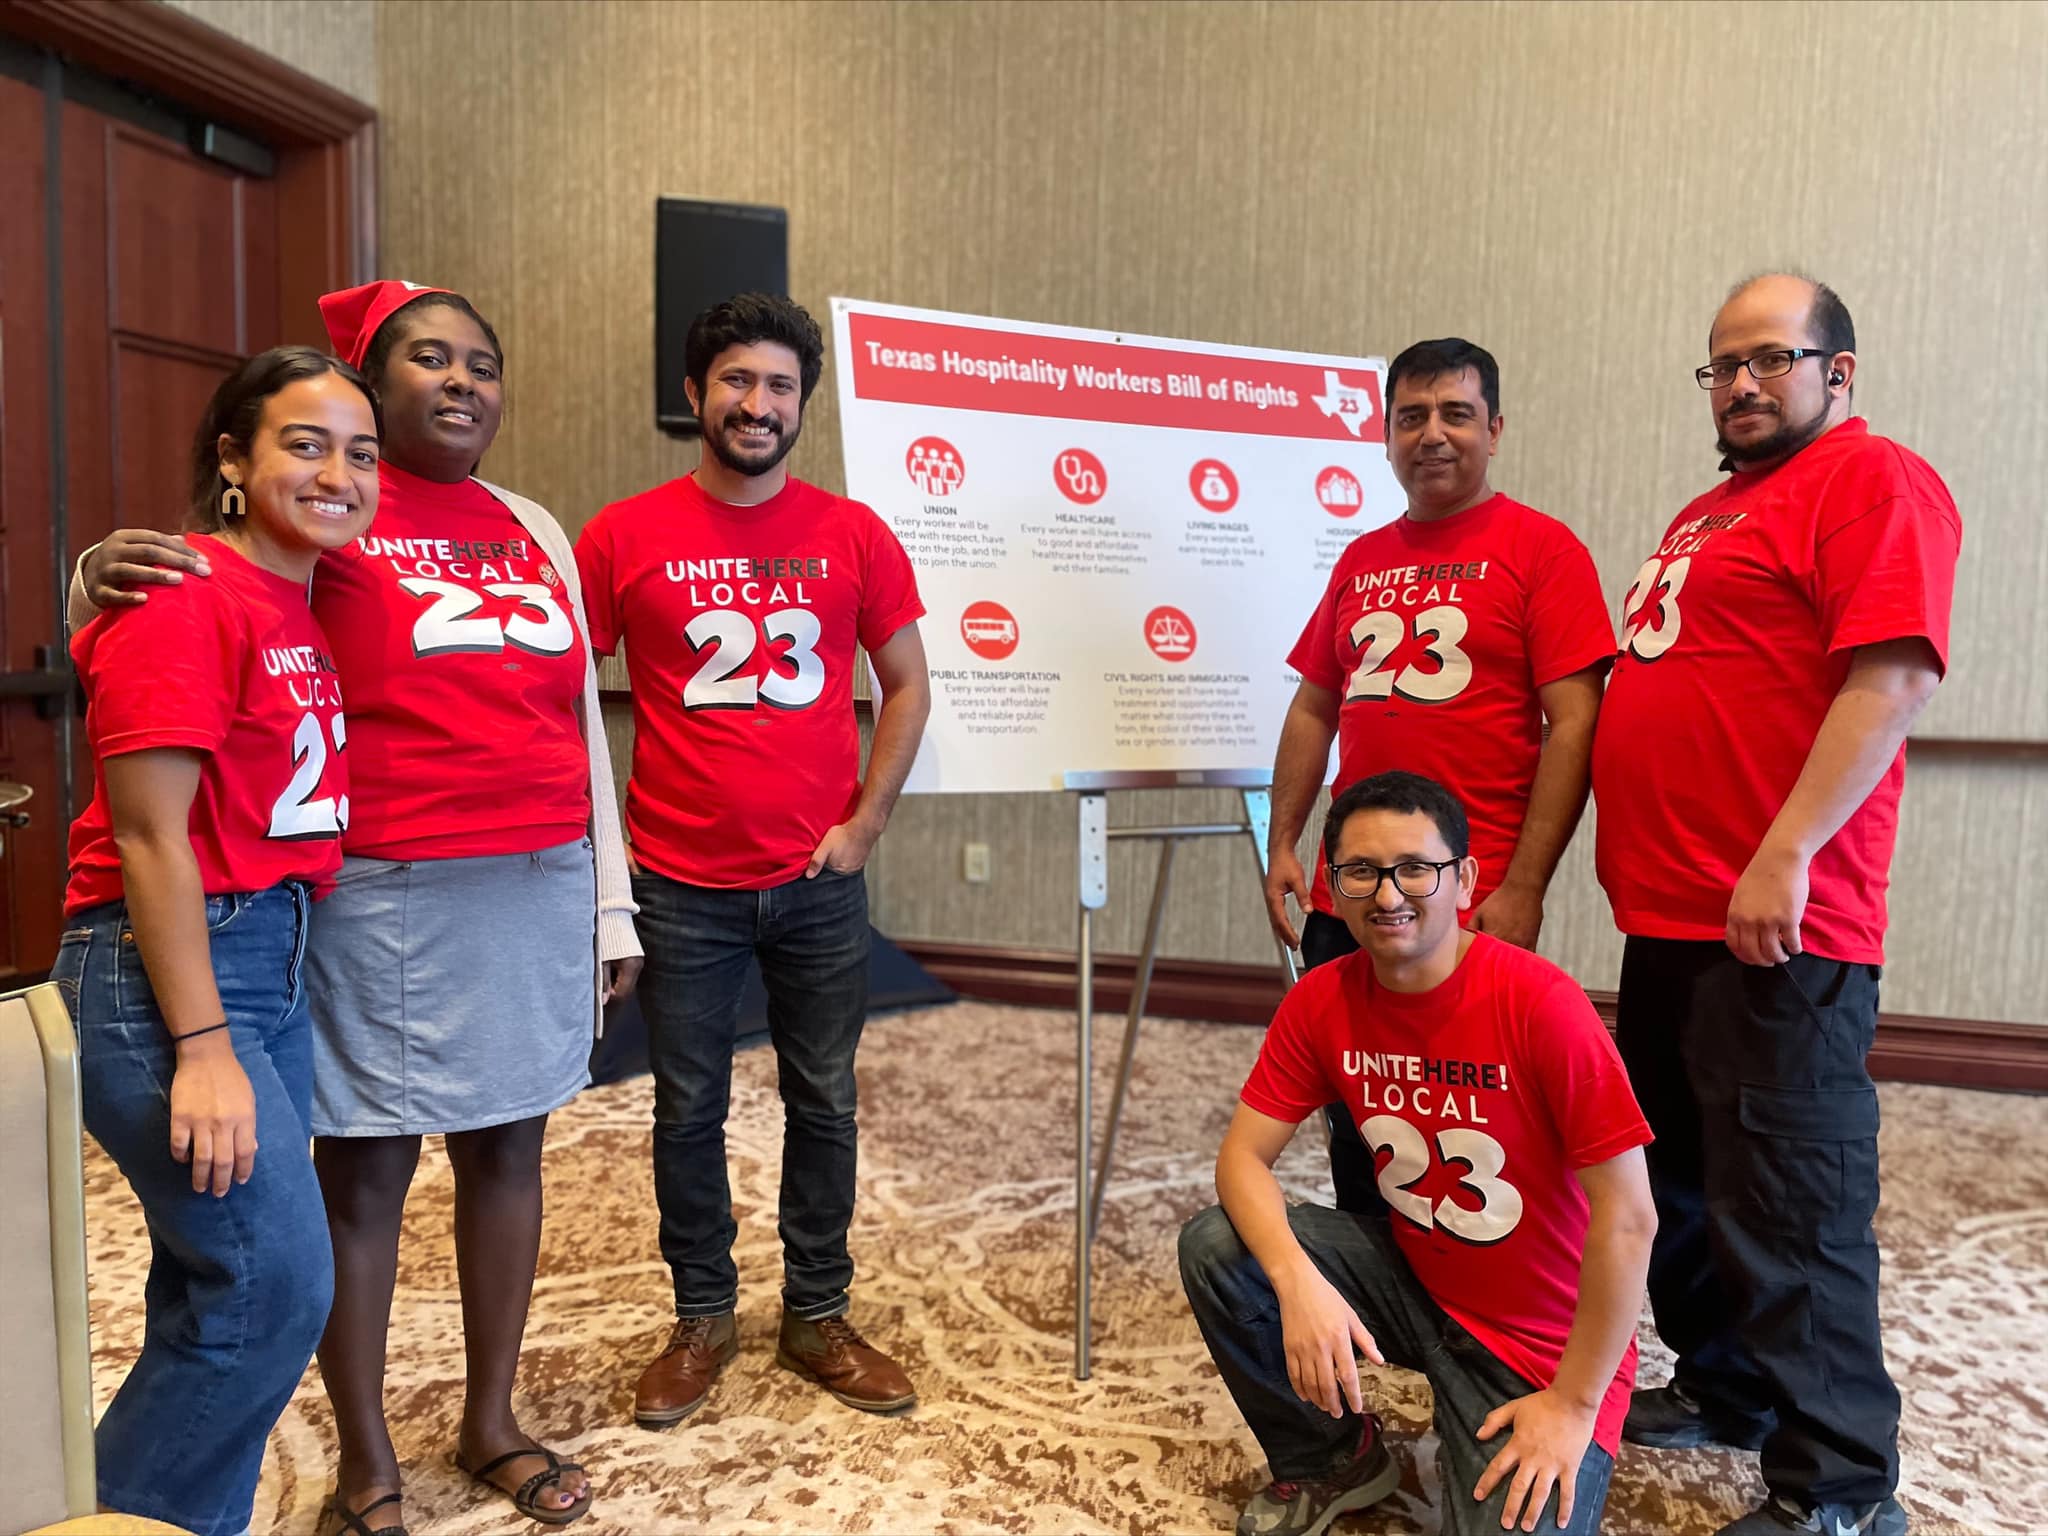 Six people wearing red union-related t-shirts standing in front of a poster board with text.